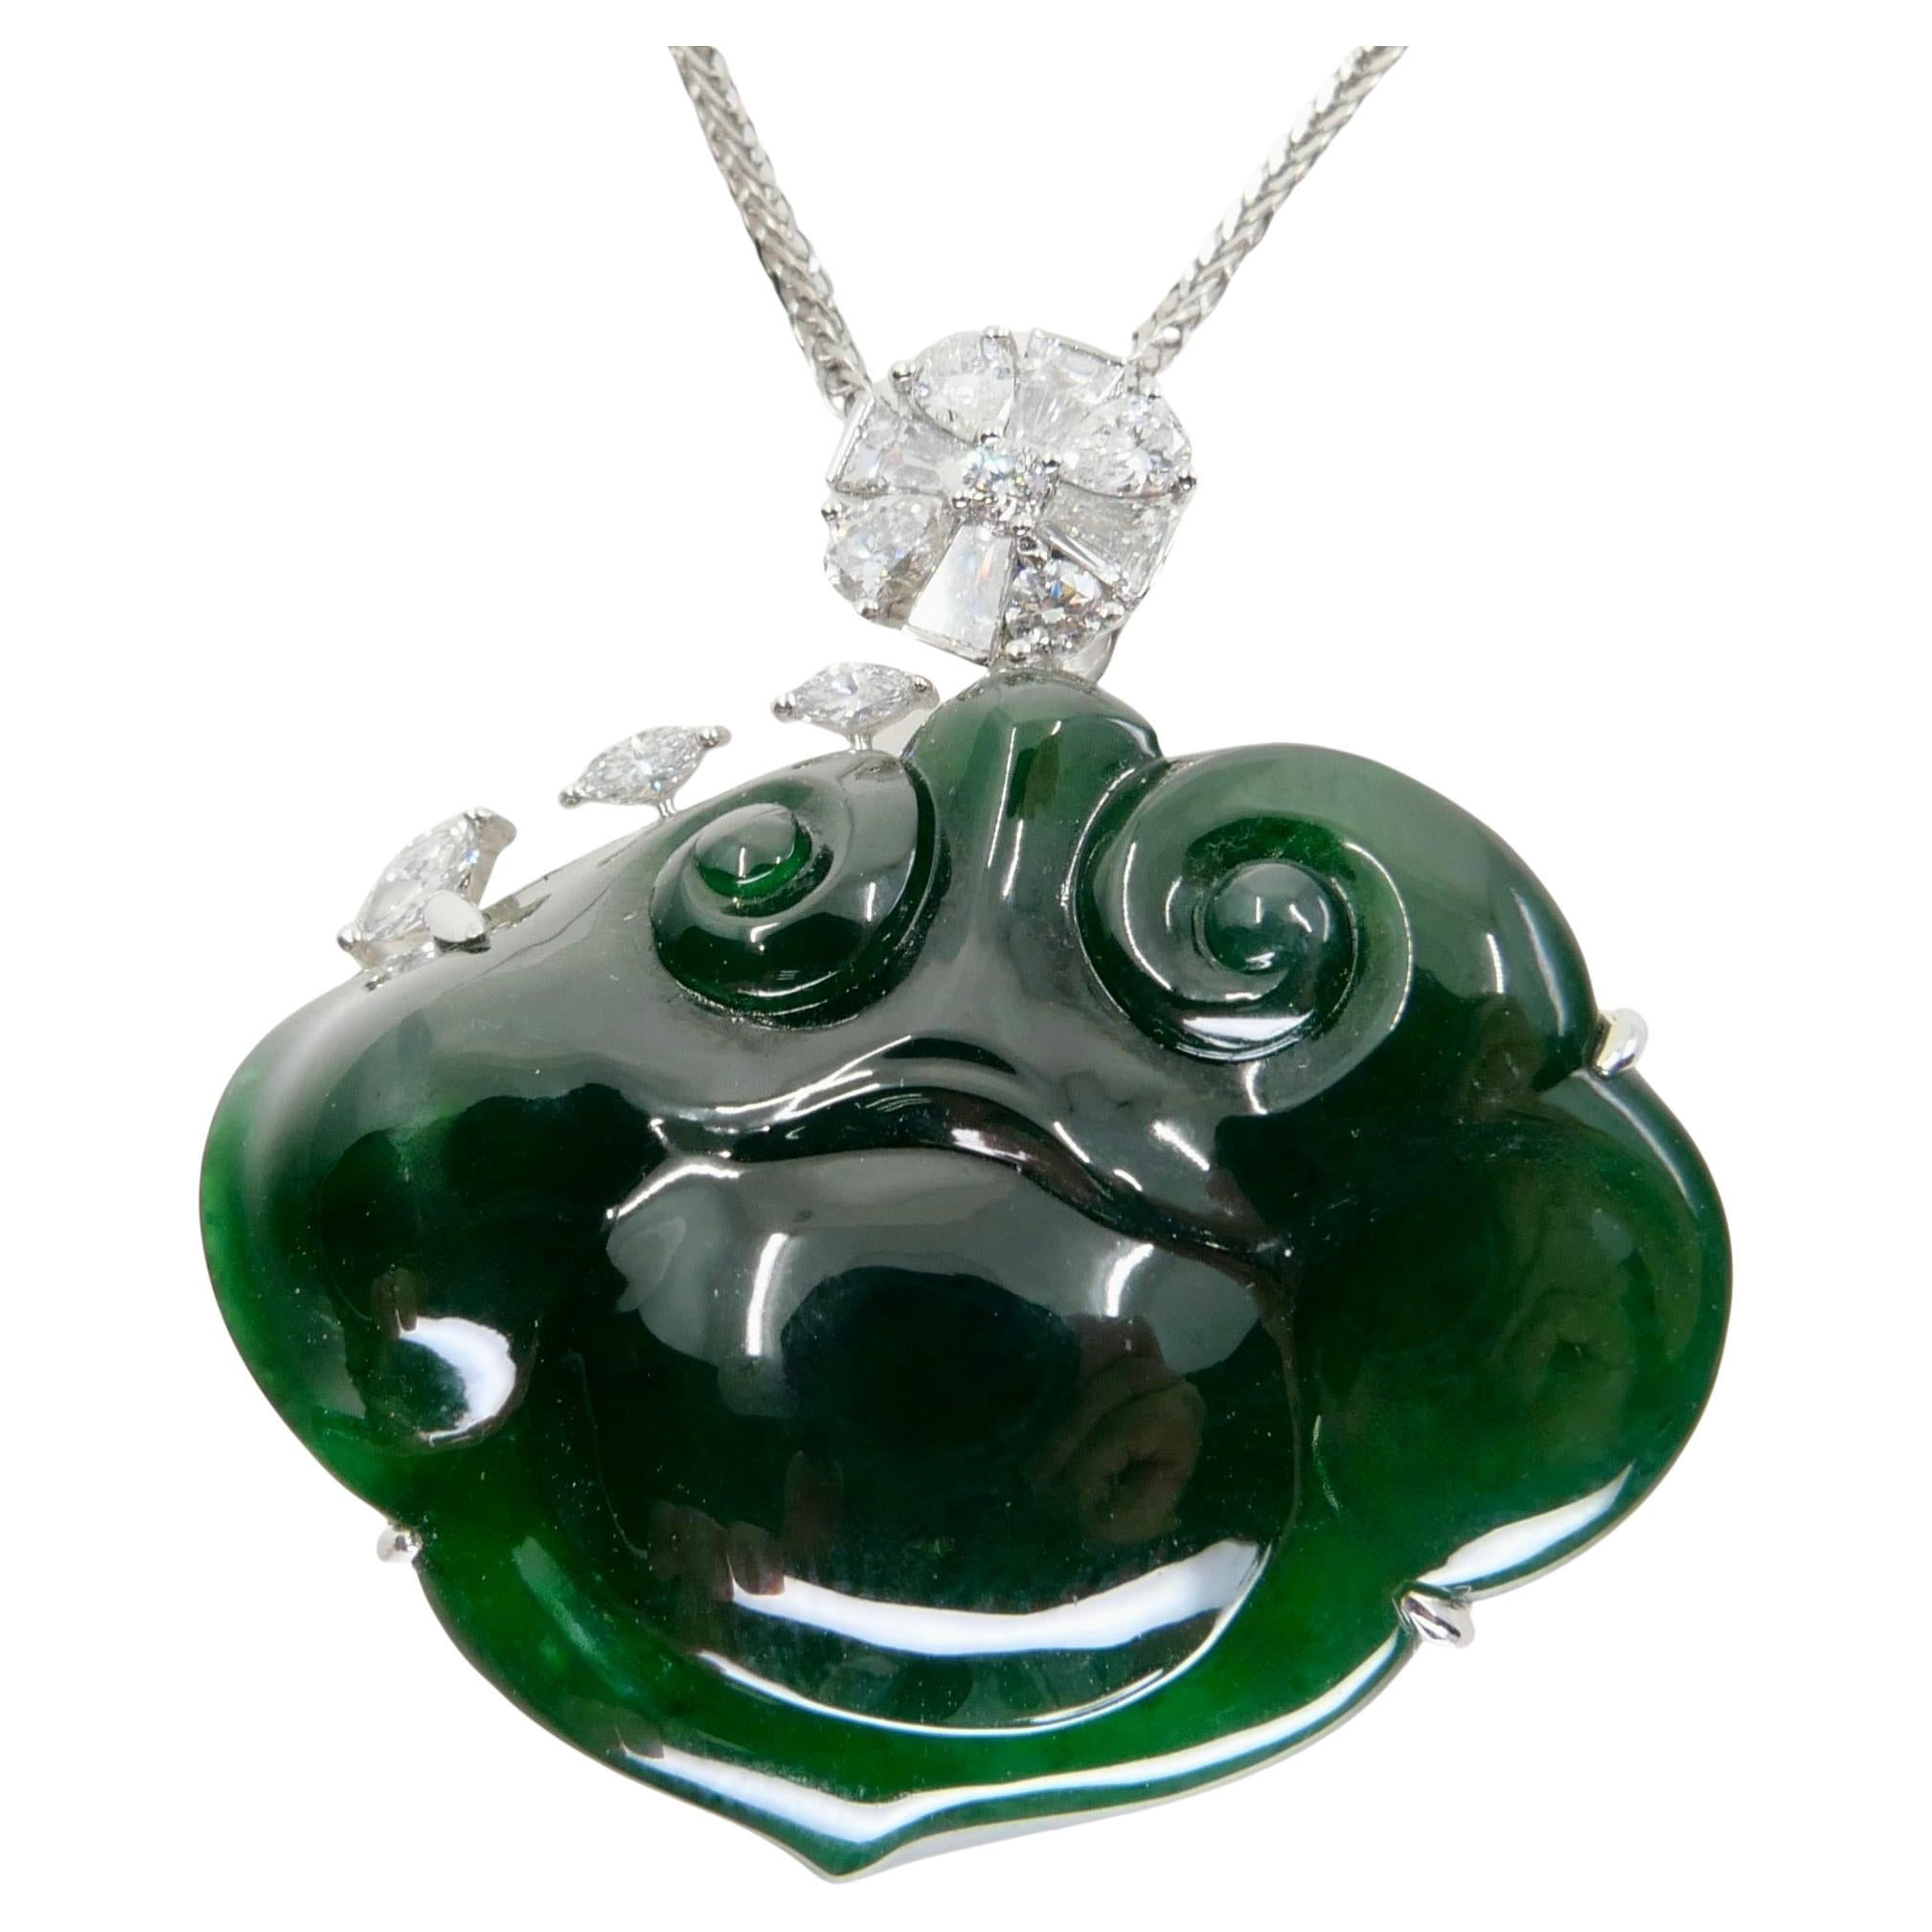 Certified Natural Carved Ruyi Jade & Diamond Pendant  Necklace. Intense Green.